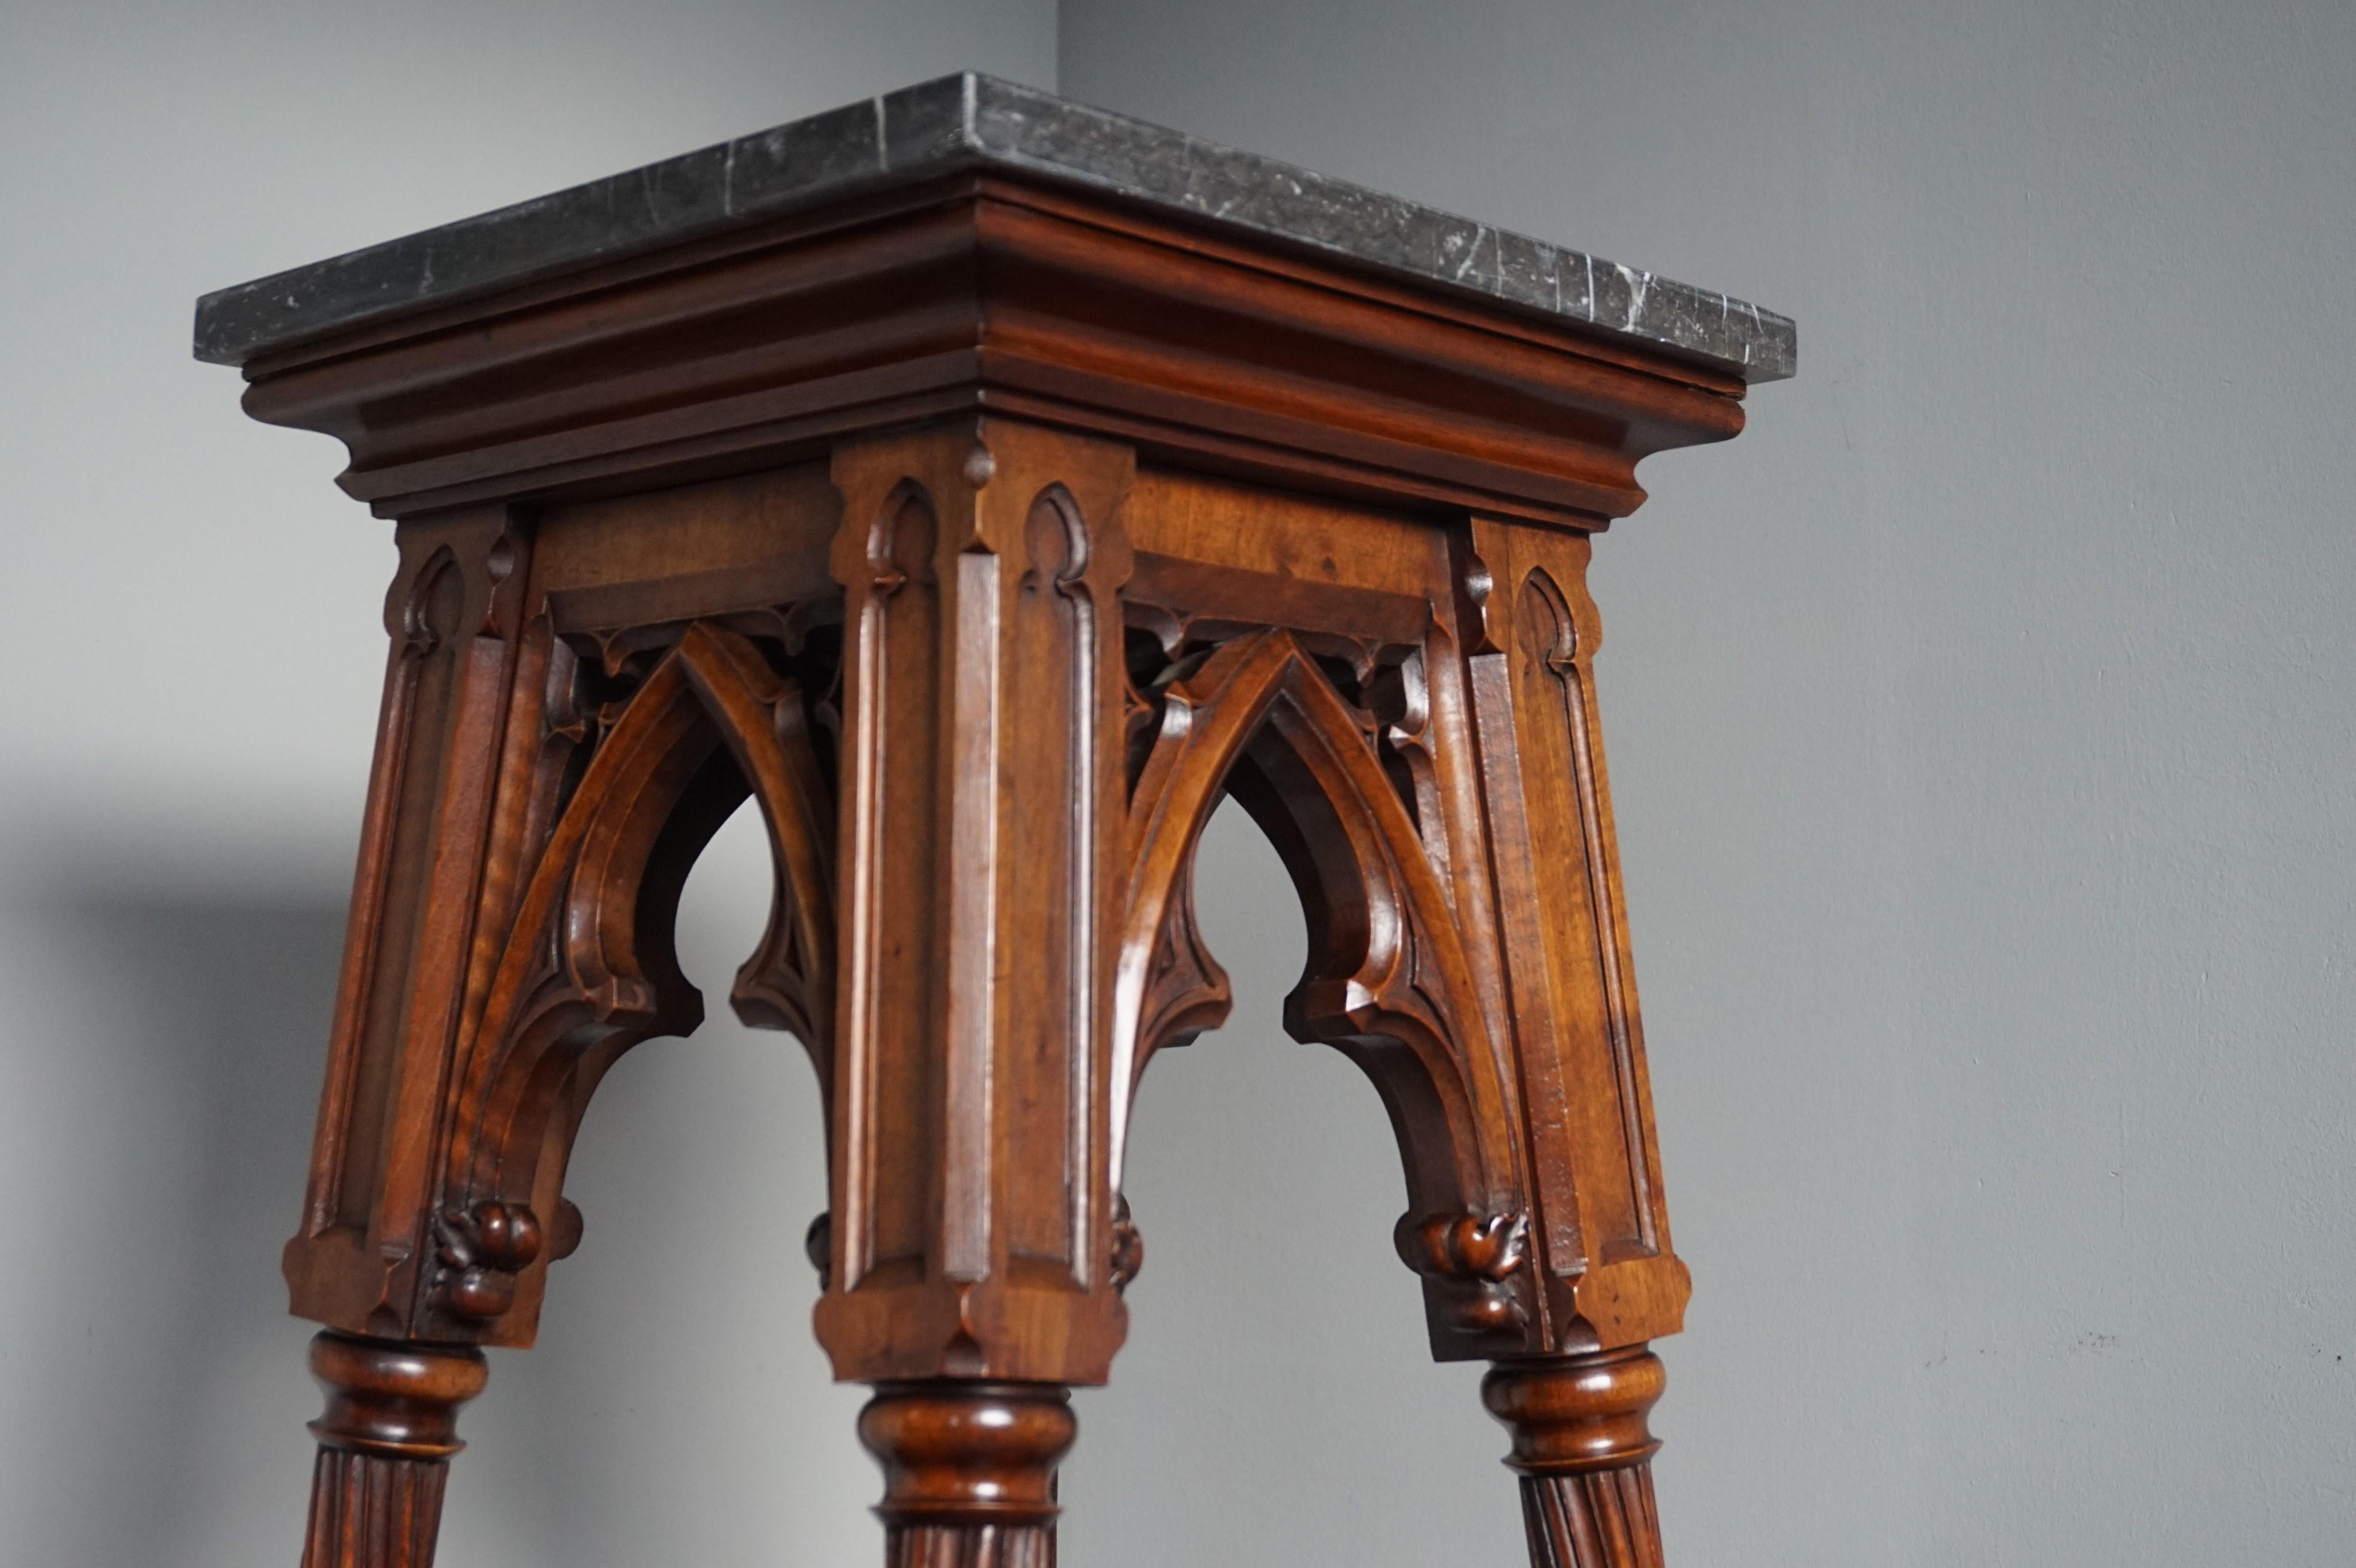 Hand-Crafted Antique Hand Carved Nutwood & Stunning Marble Top Gothic Revival Pedestal Stand